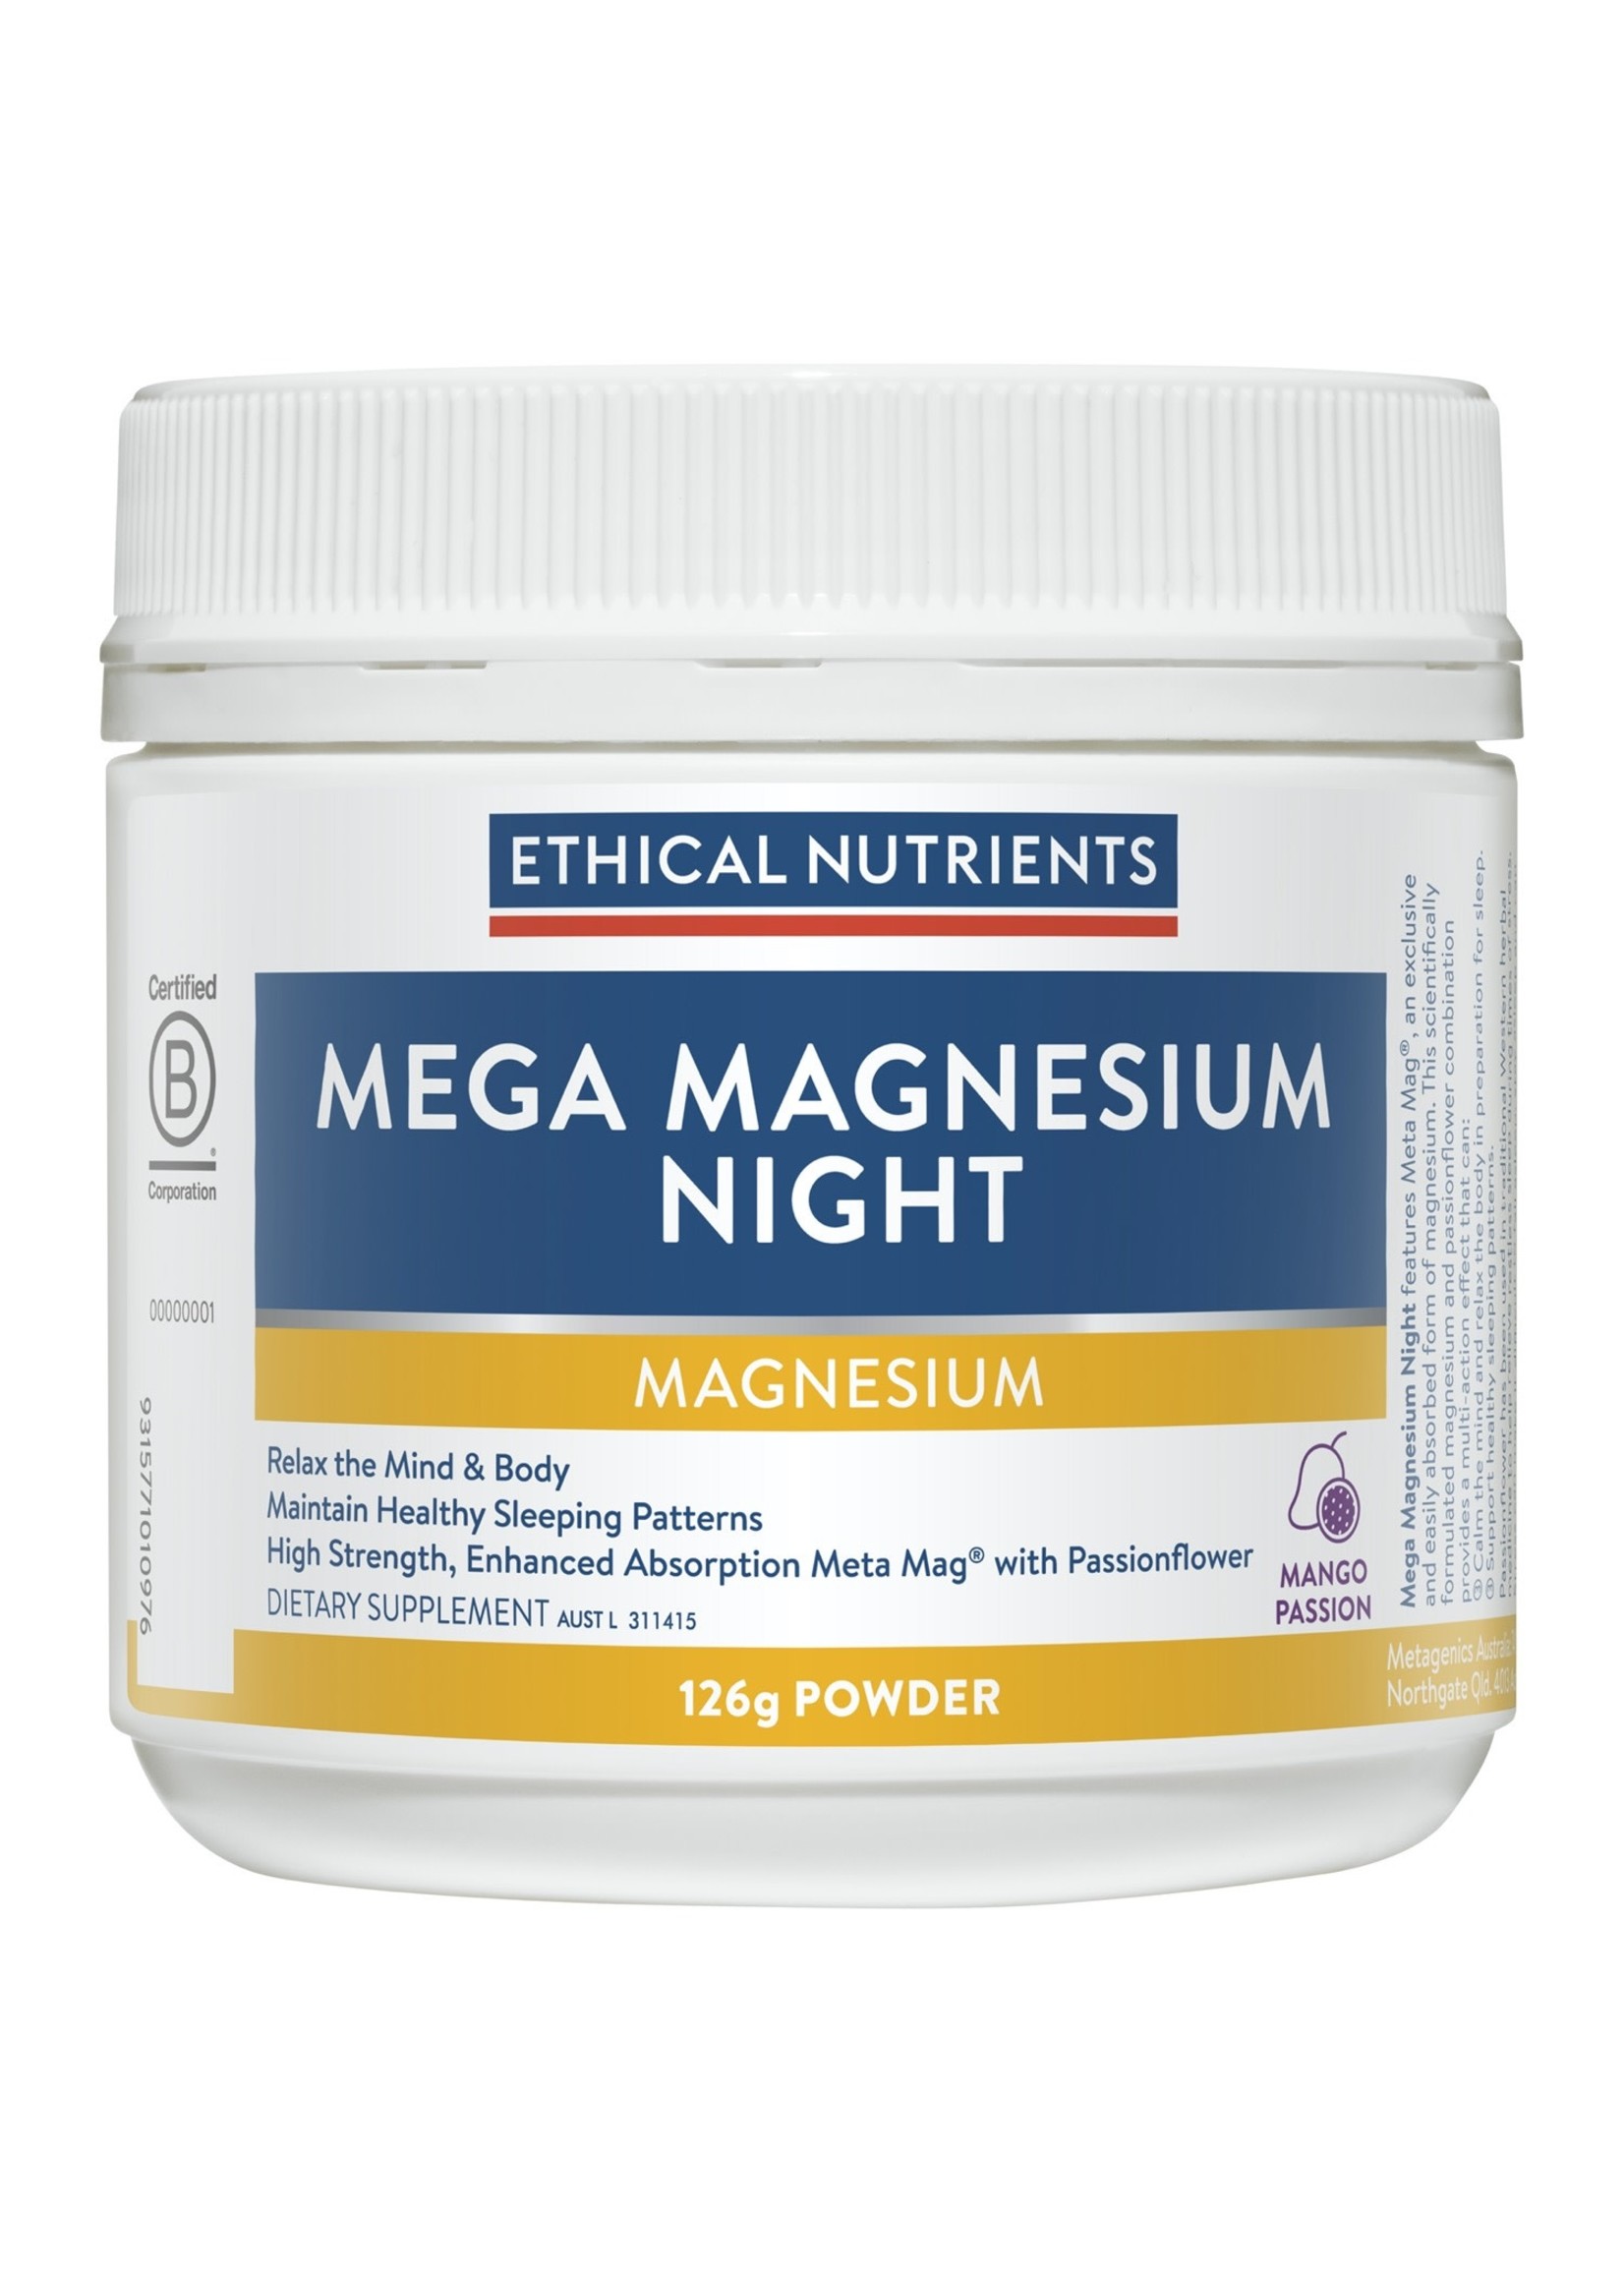 ETHICAL NUTRIENTS Ethical Nutrients Mega Mag Night  126g Mango Passion